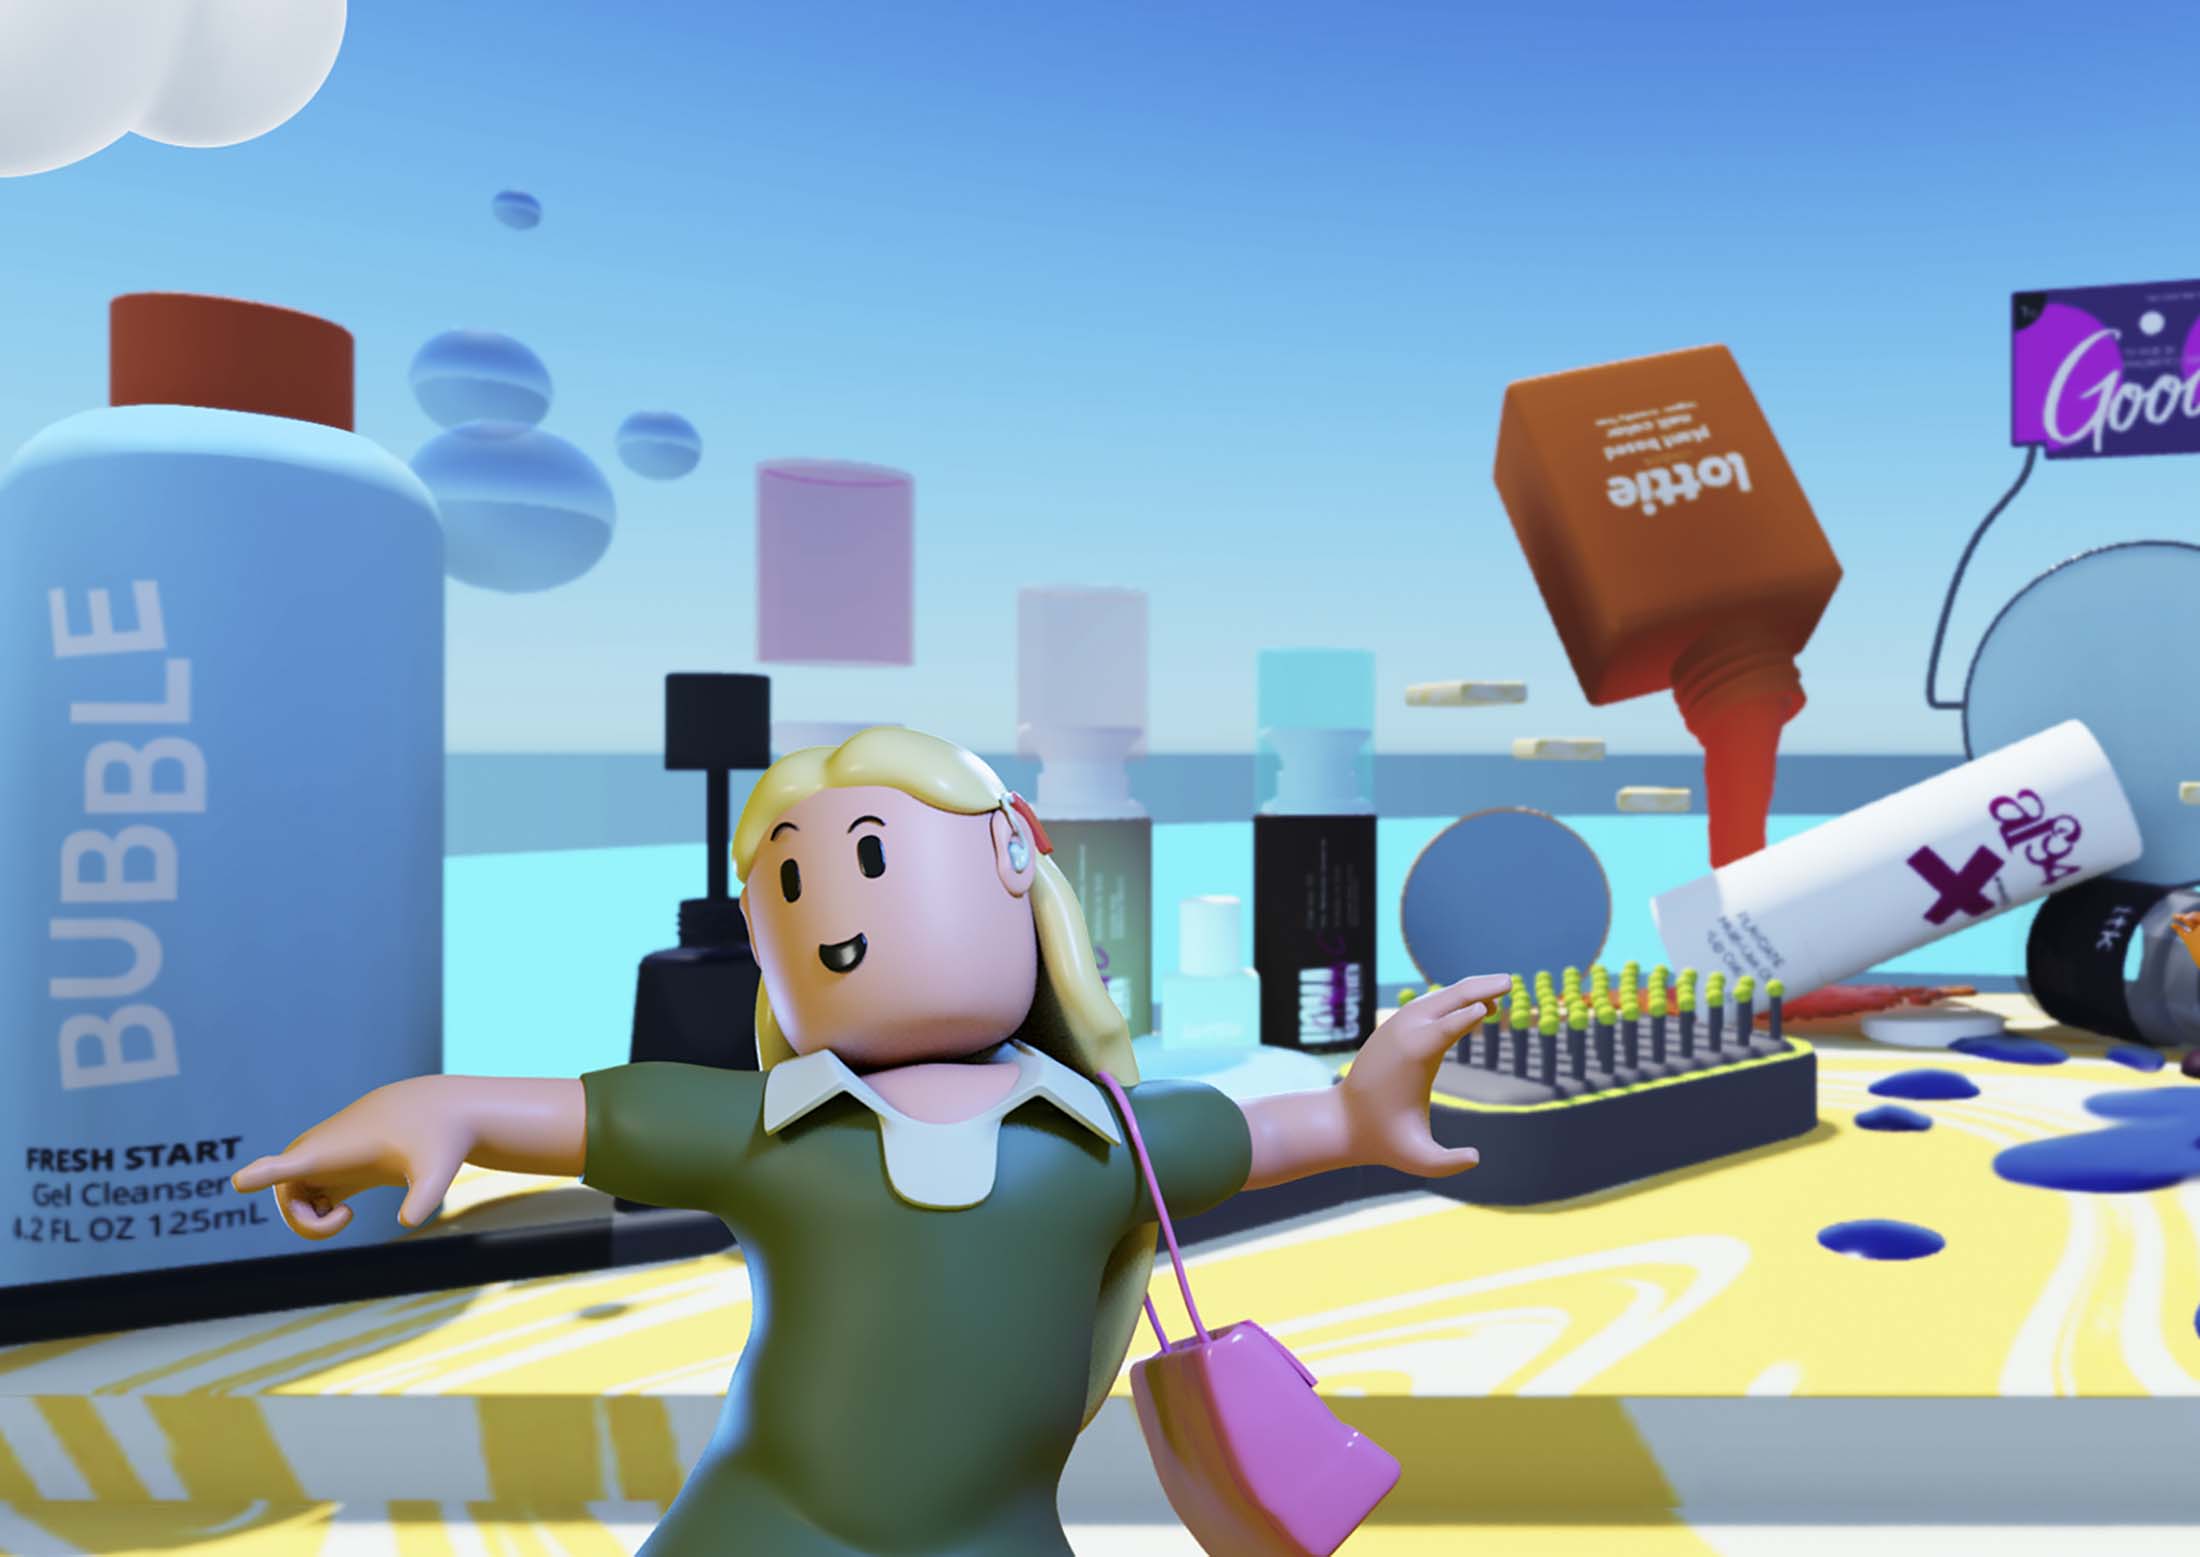 Walmart Roblox Store Is First Foray Into Metaverse (WMT) - Bloomberg